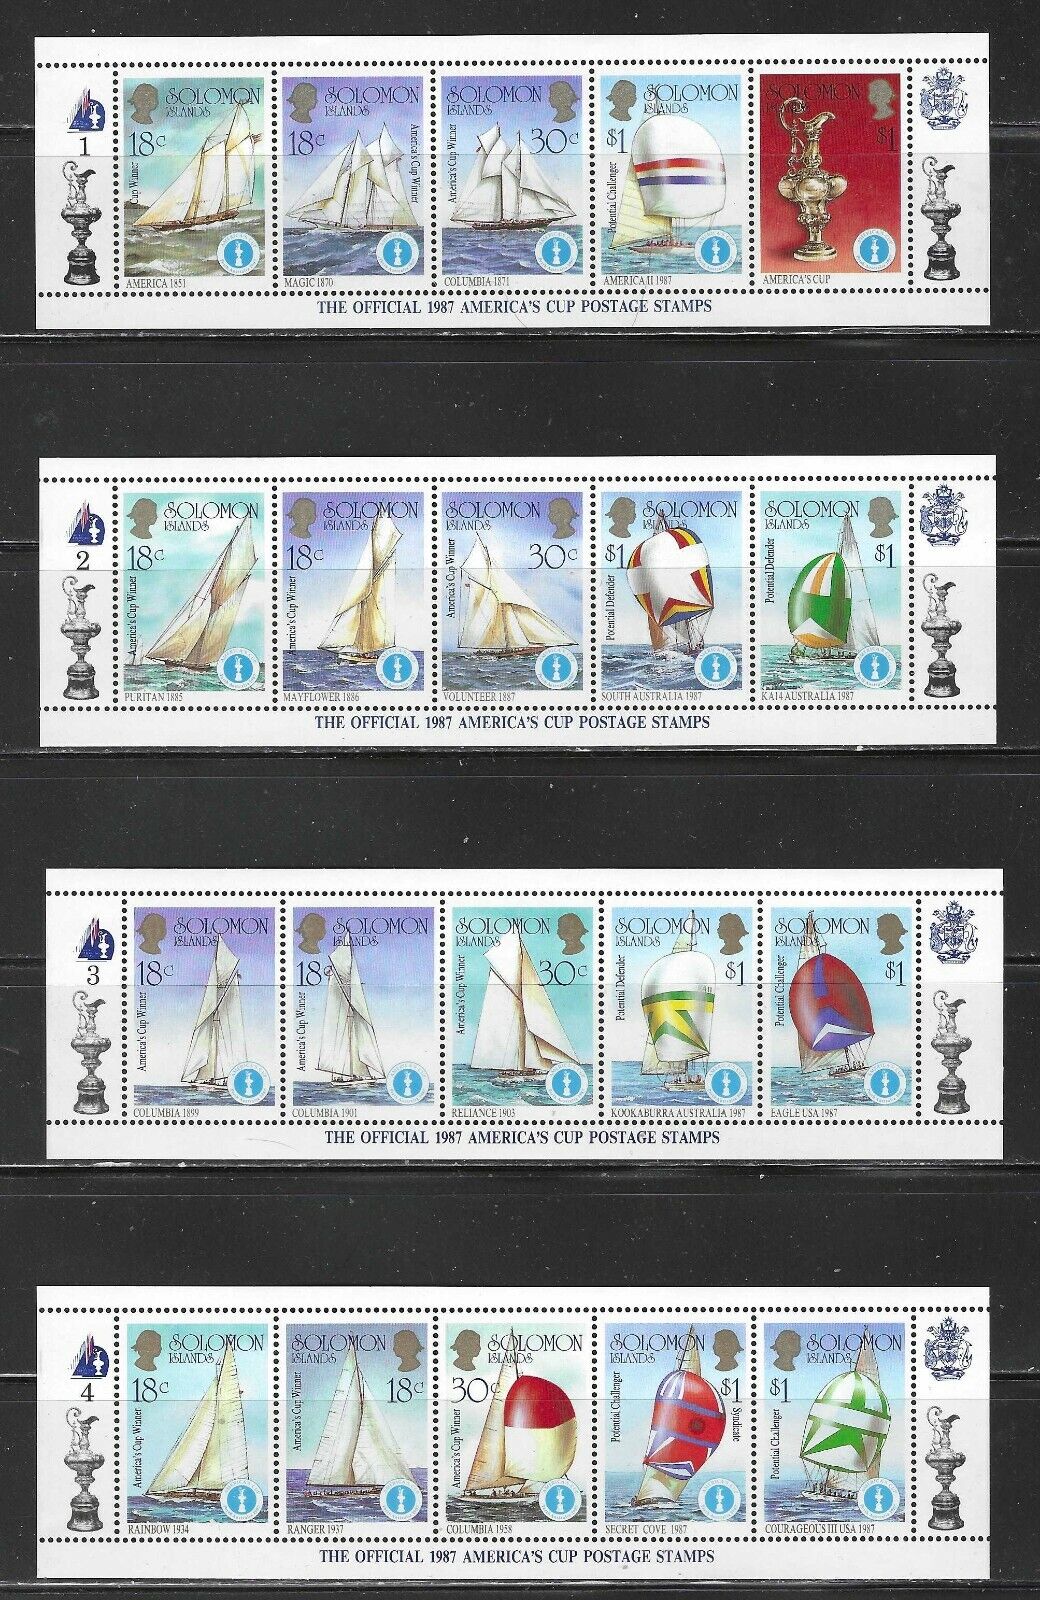 SOLOMON ISLANDS -570-574 STRIPS OF 5 & LABELS+575 S/S - MNH-1986 - AMERICA'S CUP